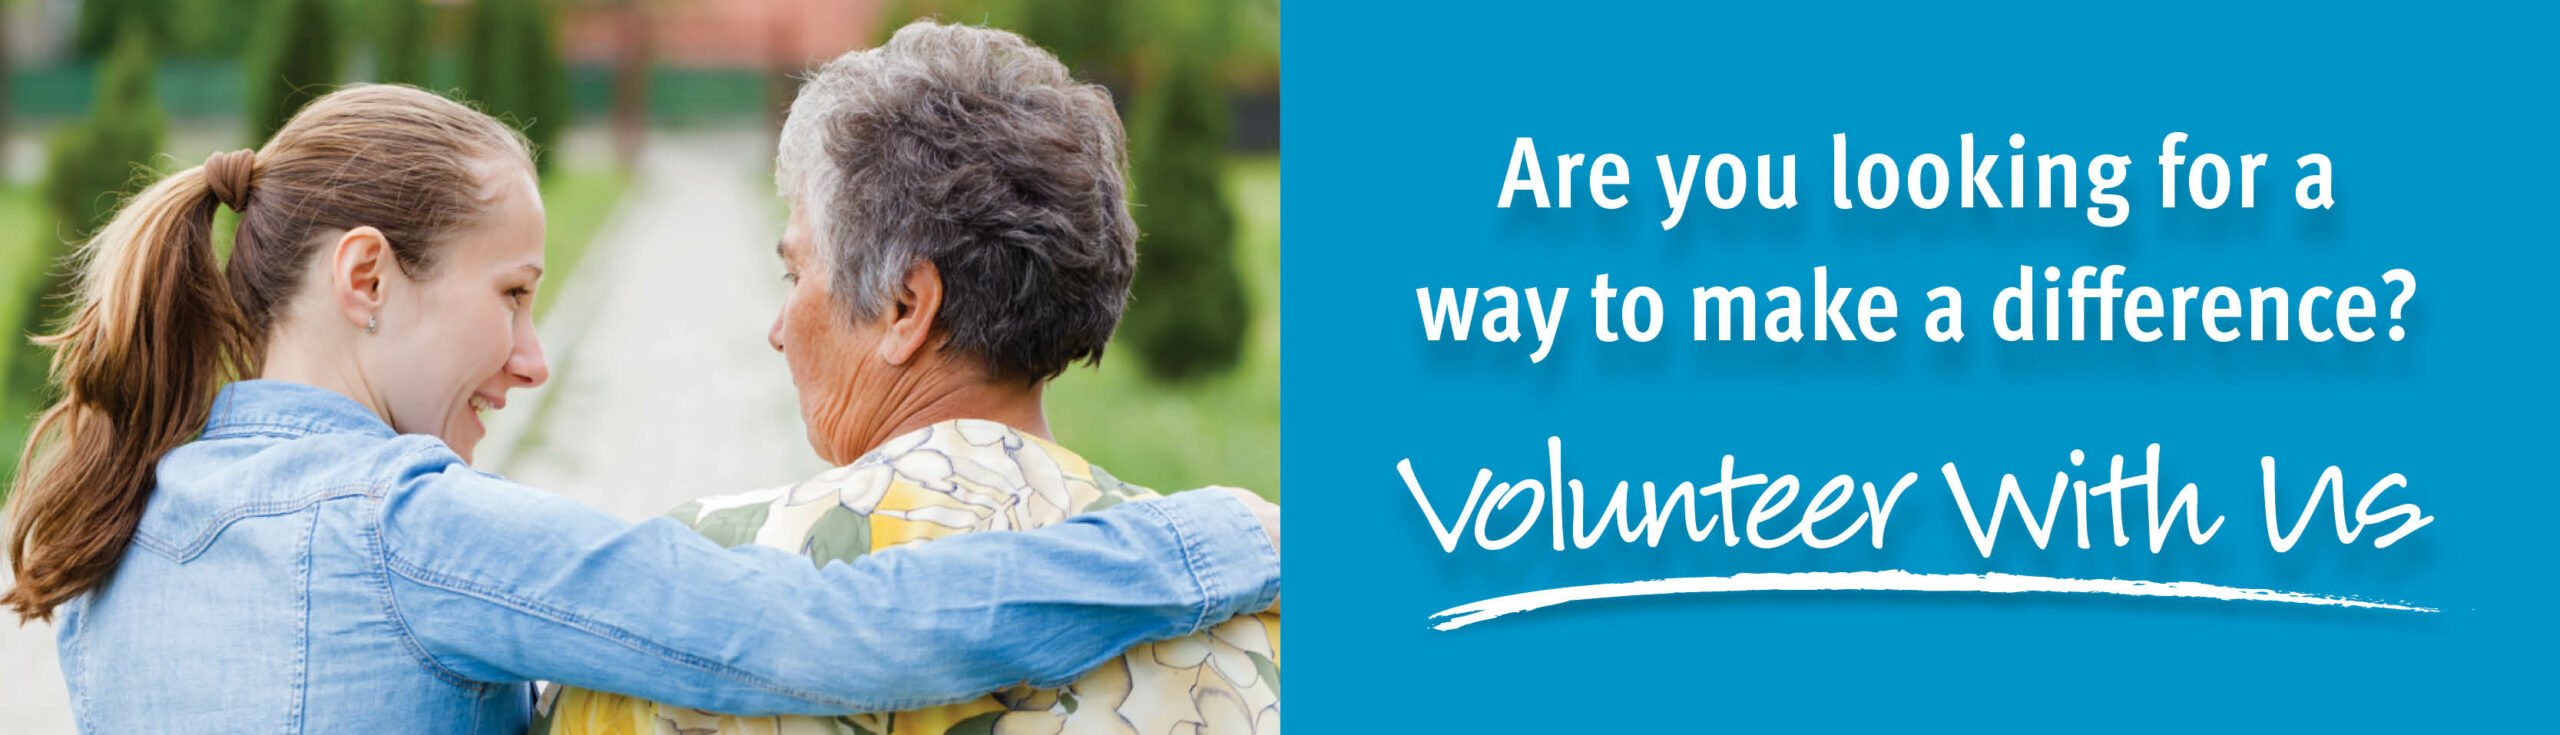 Are you looking for a way to make a difference? Volunteer With Us